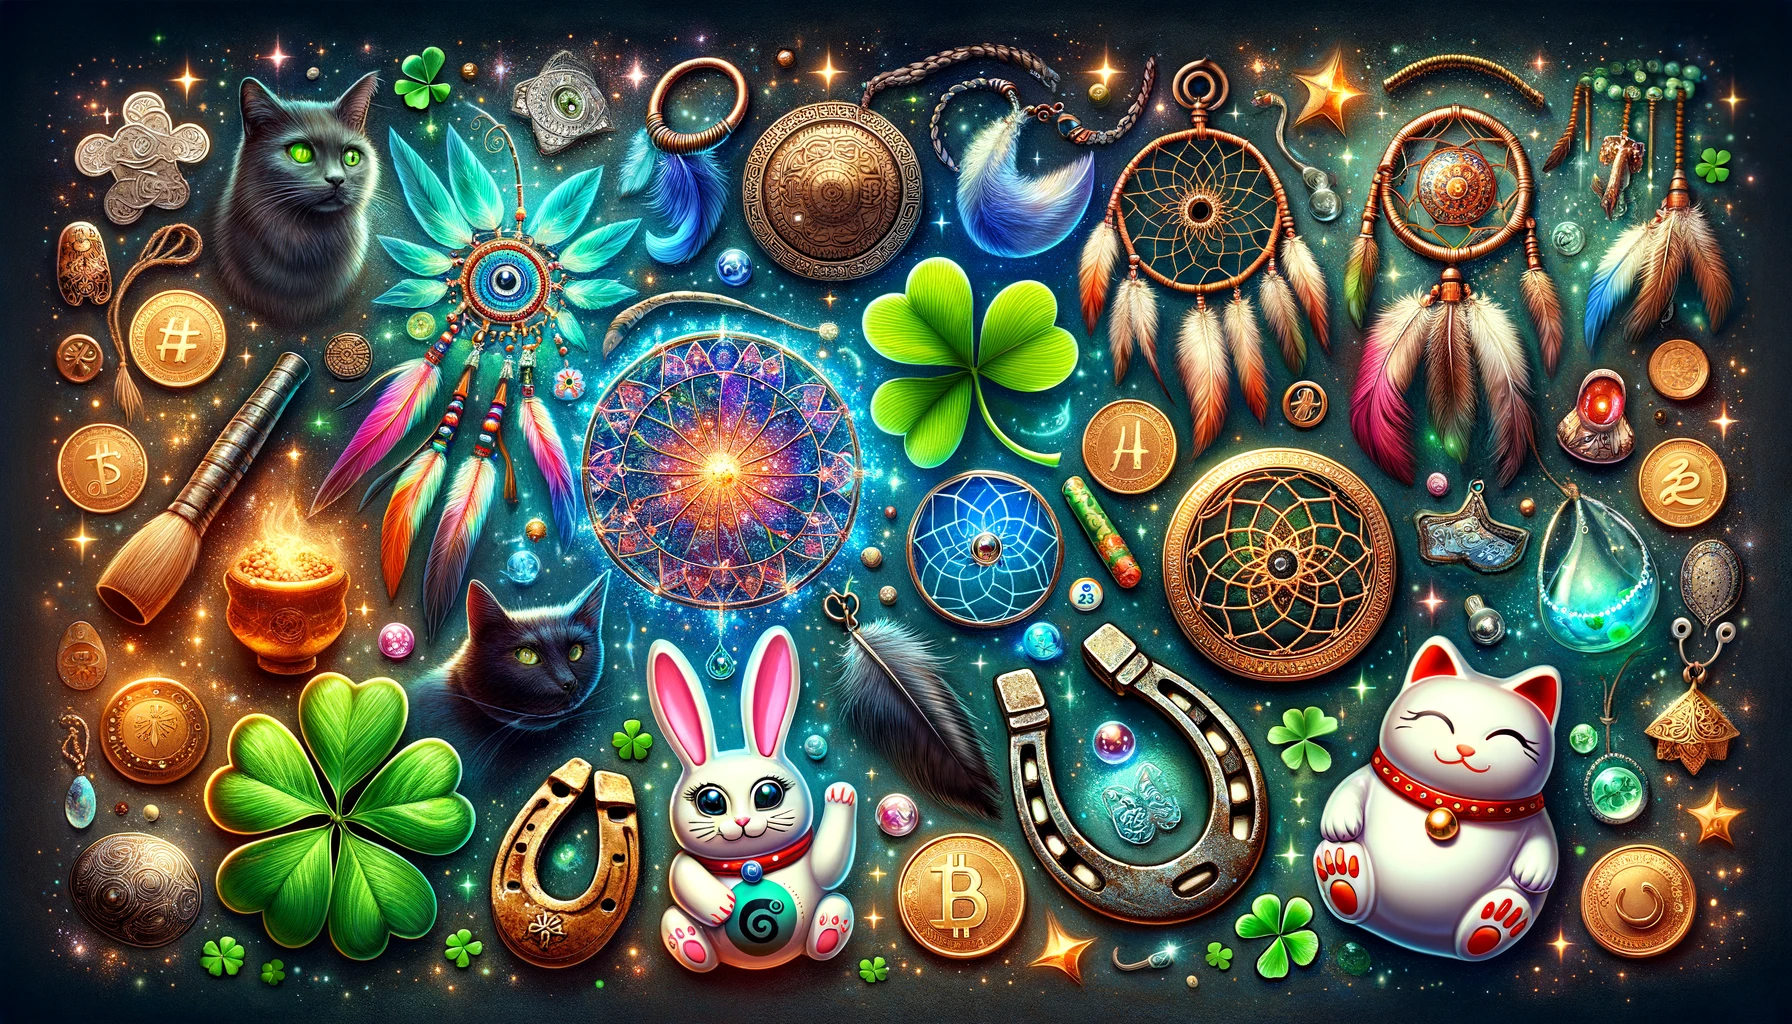 ·E 2023 11 21 03.59.54   A mystical and enchanting featured blog image for an article about popular good luck talismans. The image should be vibrant and colorful, depicting a .png